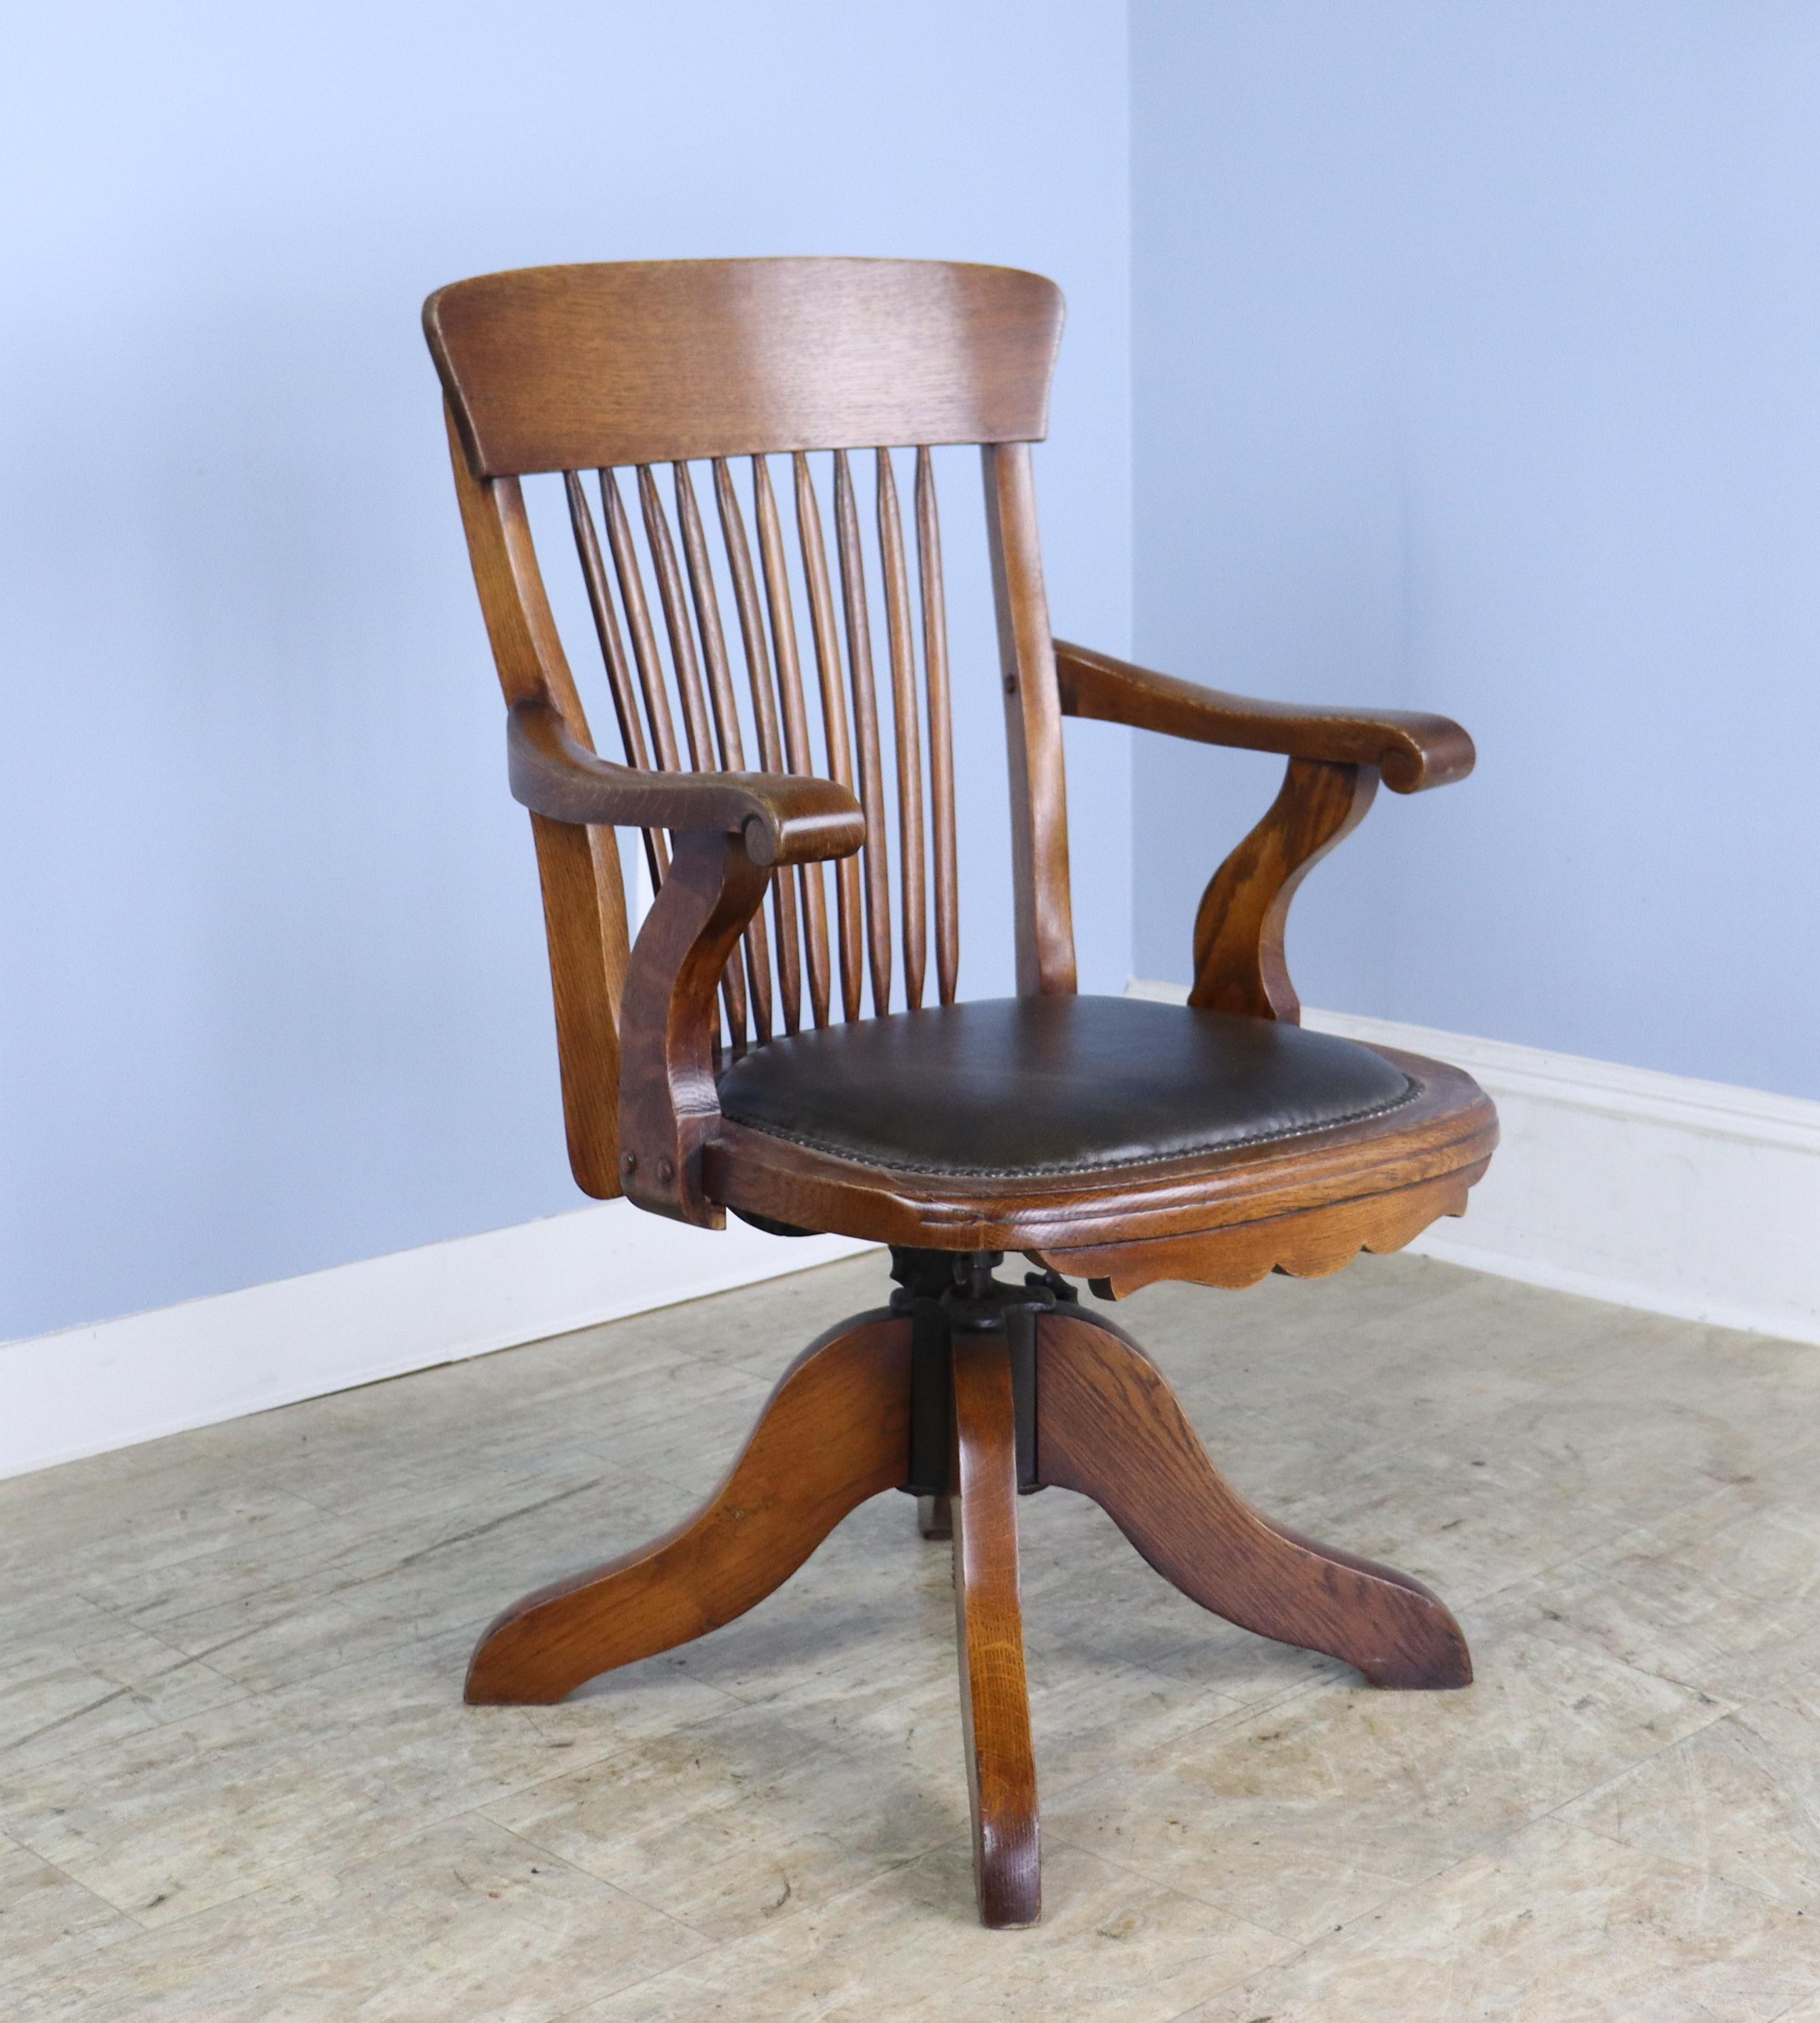 A handsome oak swivelling office chair with a seat height that adjusts manually from 17.5